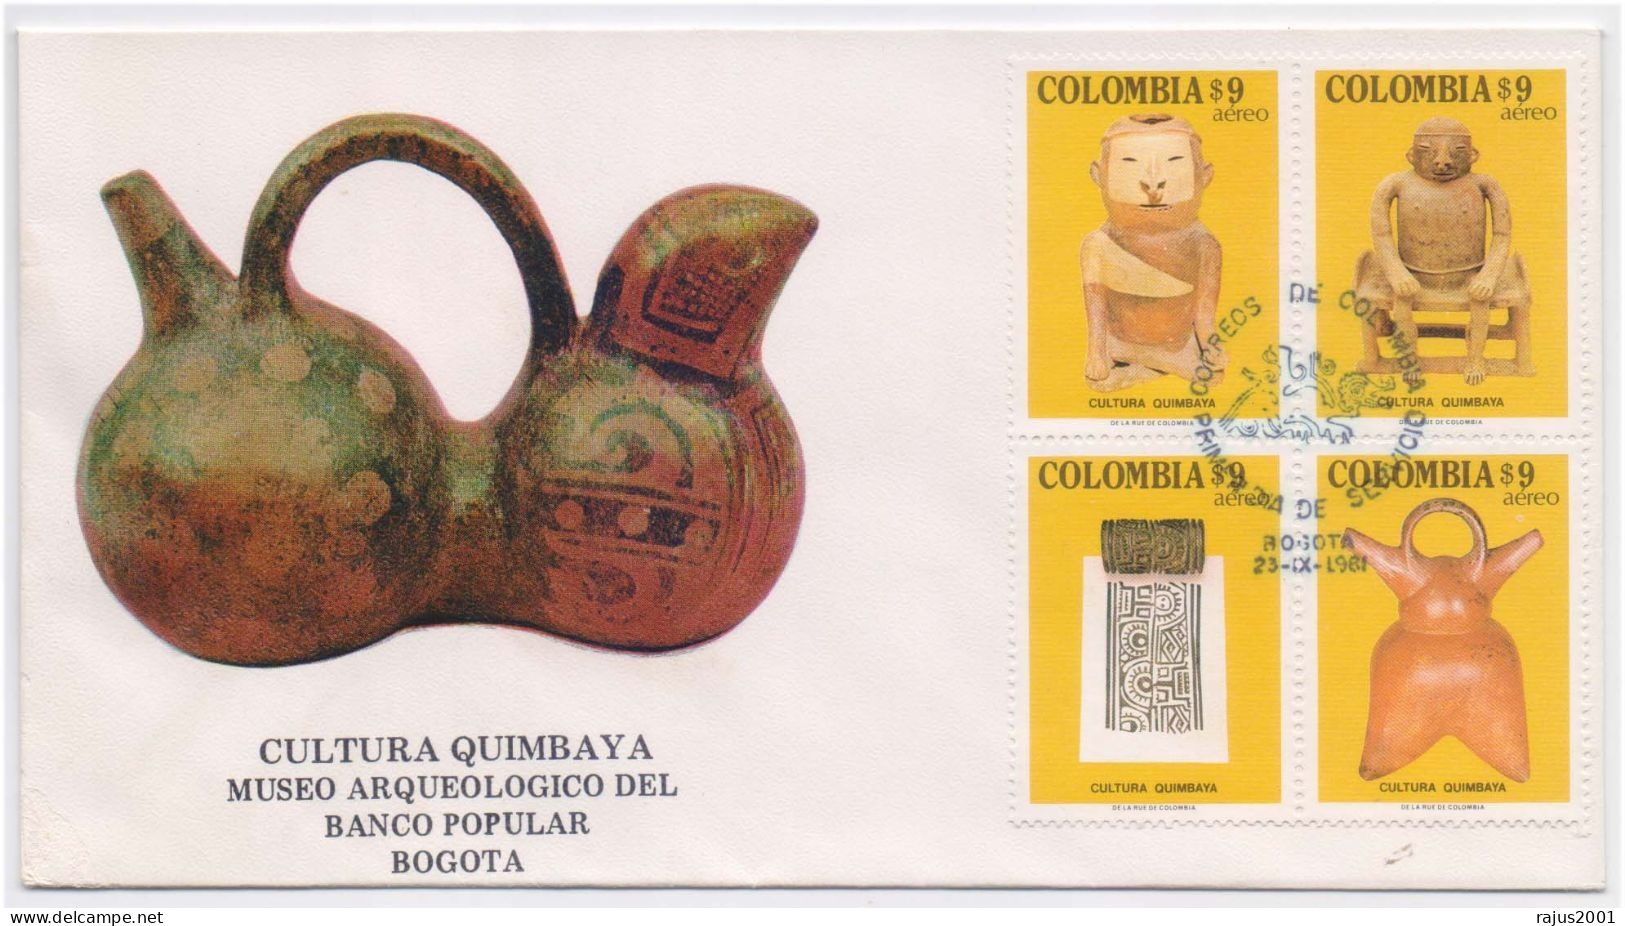 Culture Quimbaya, Archaeological Museum, Archaeology, Indigenous Indian Handicrafts, Sculpture, Colombia FDC - Arqueología